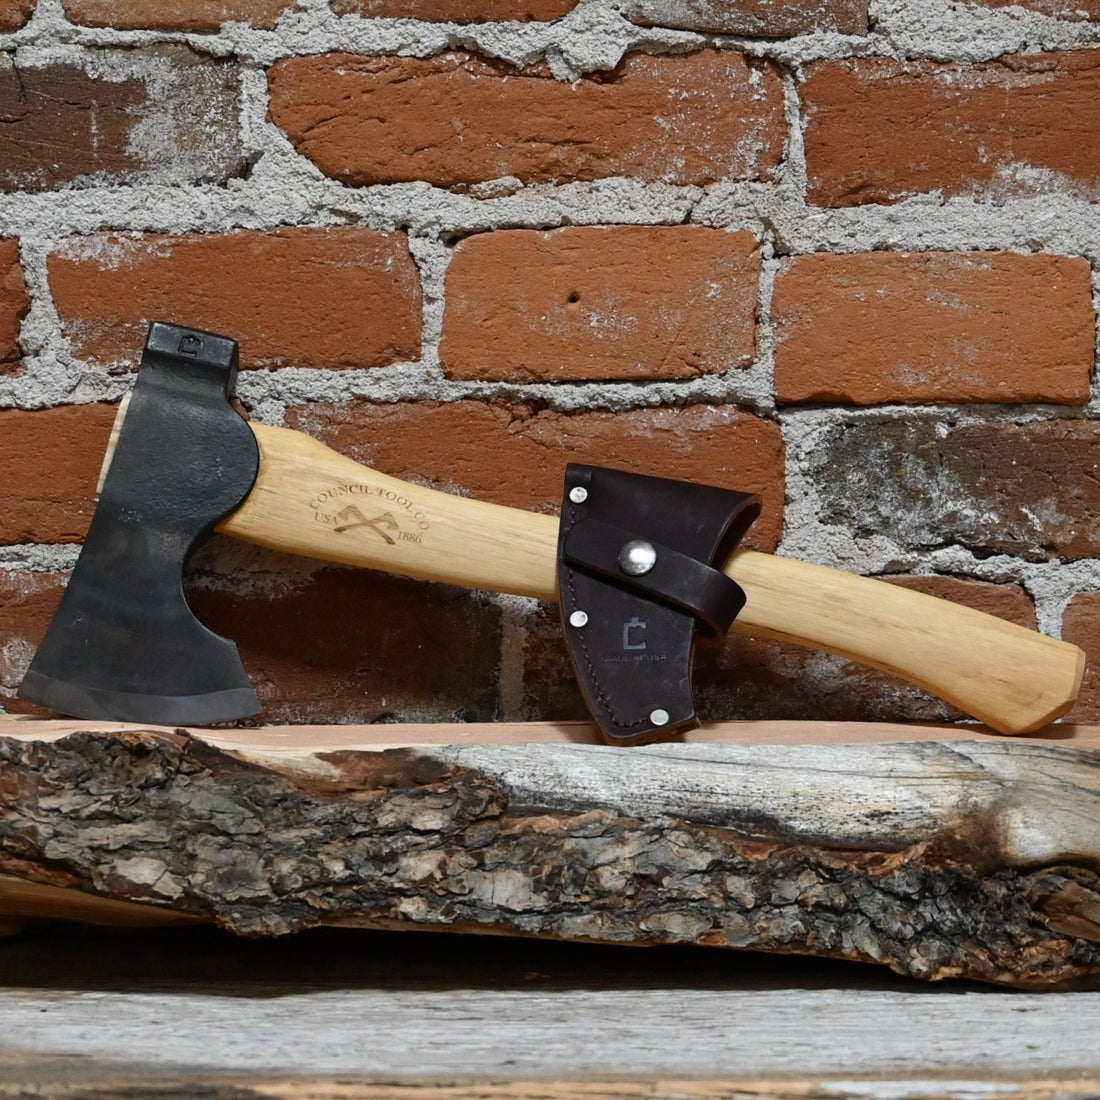 Wood-Craft 1.7lbs Camp Carver Axe W/16&quot; Curved Handle &amp; Mask view of axe